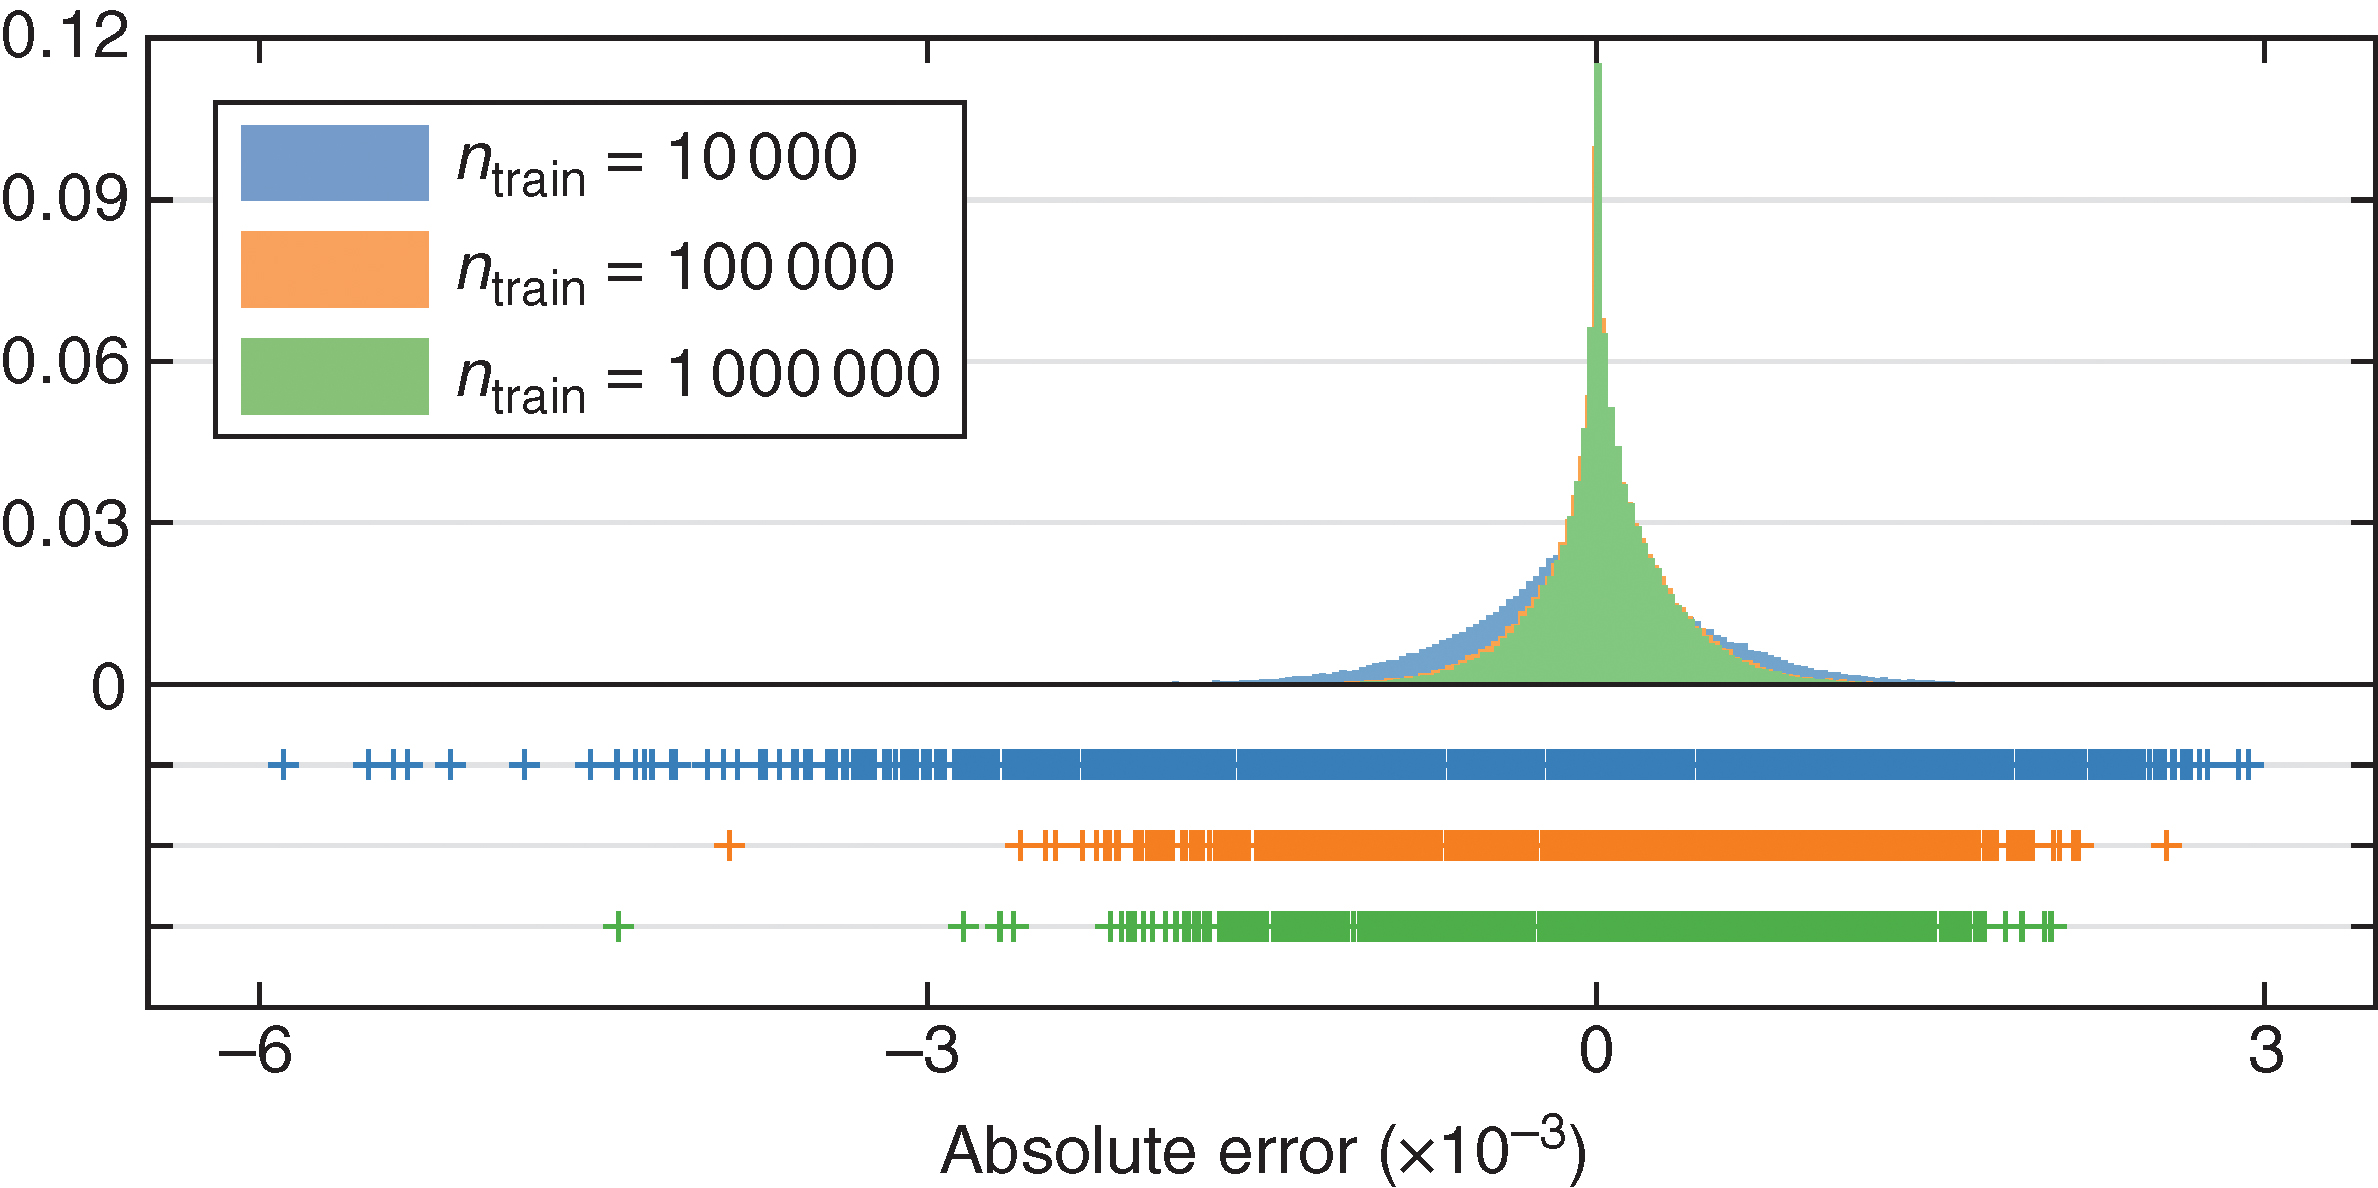 Out-of-sample prediction errors for GBM models trained on sets of 10,000, 100,000 and 1,000,000 instances.